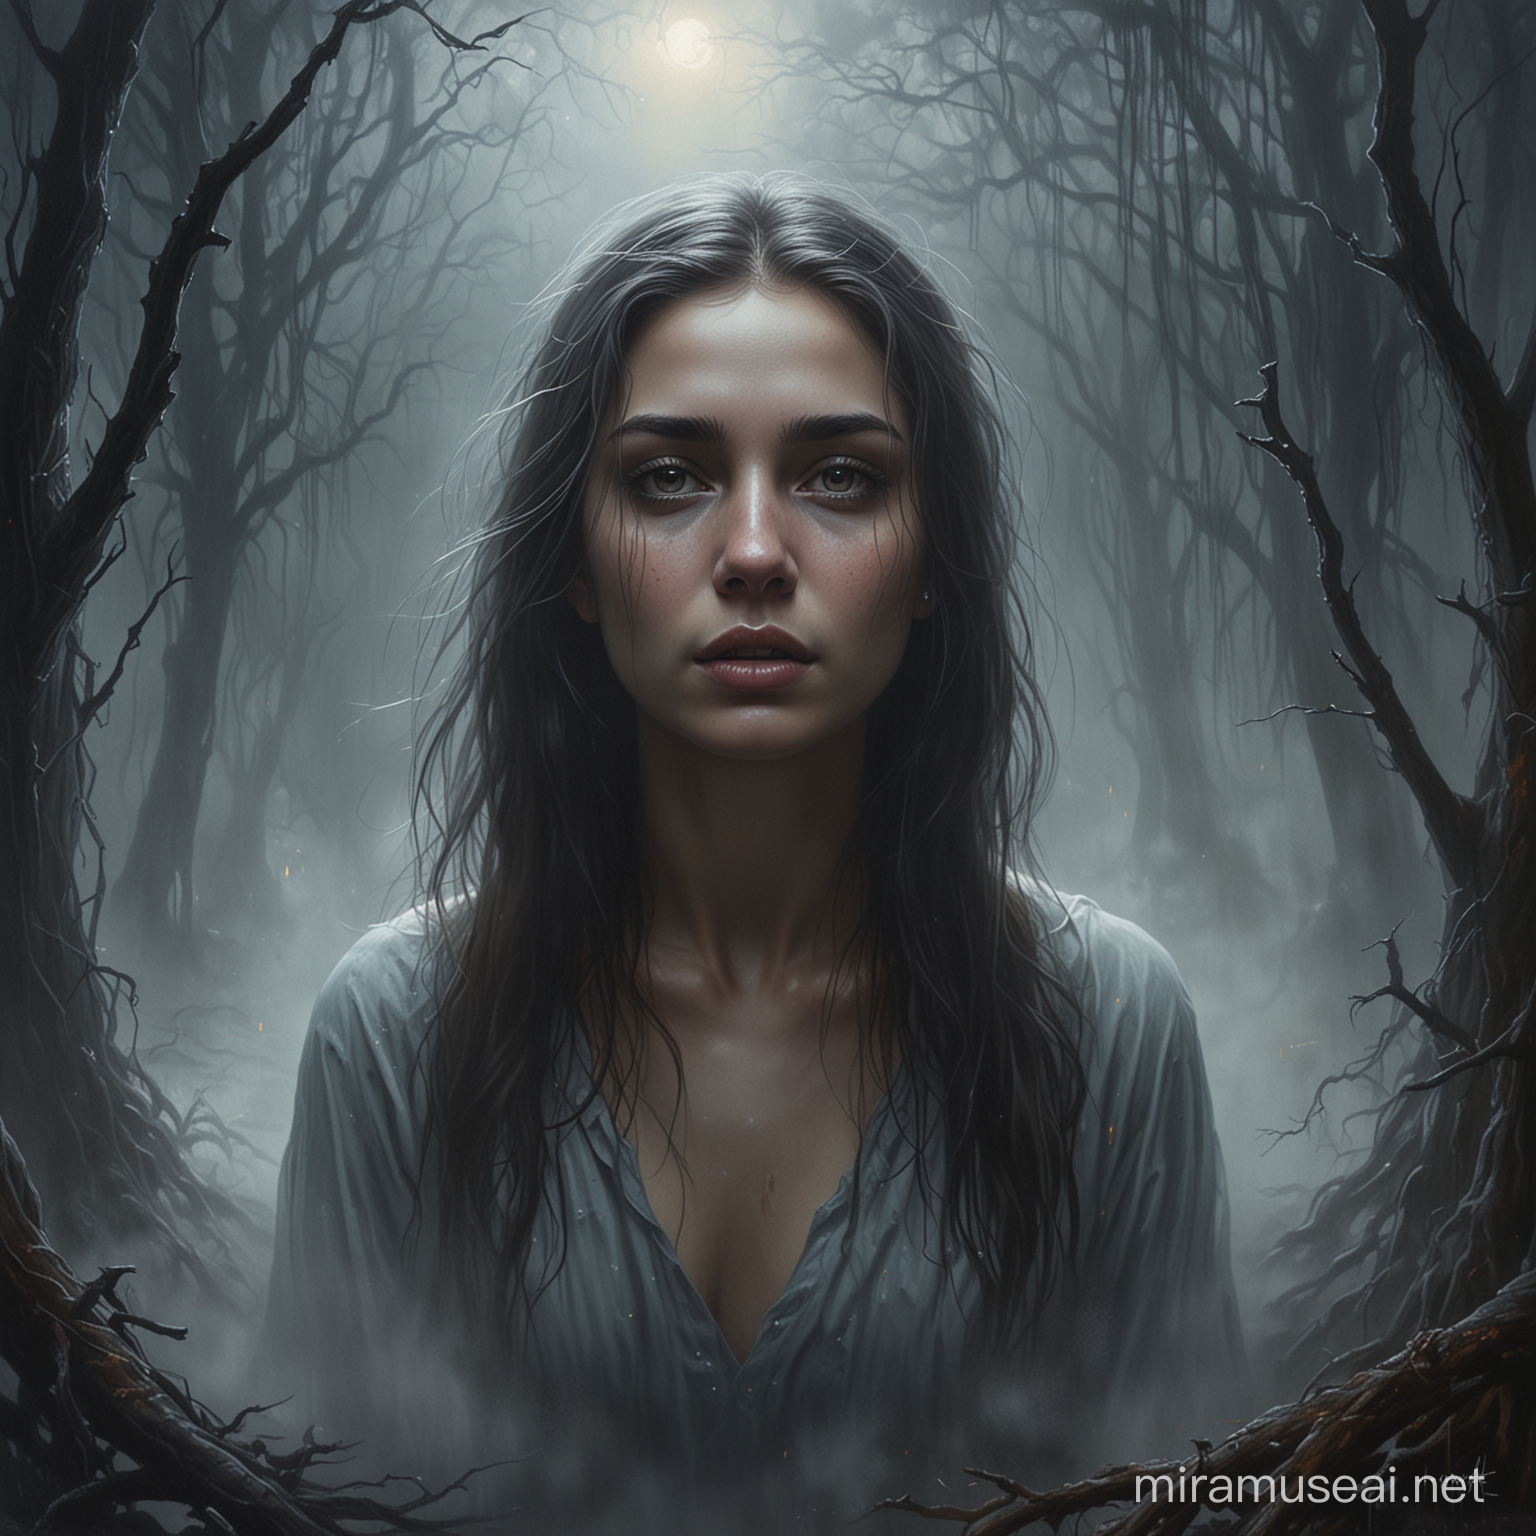 oil painting of beautiful young woman lost in a dark fog, nightmare world, mystical realms